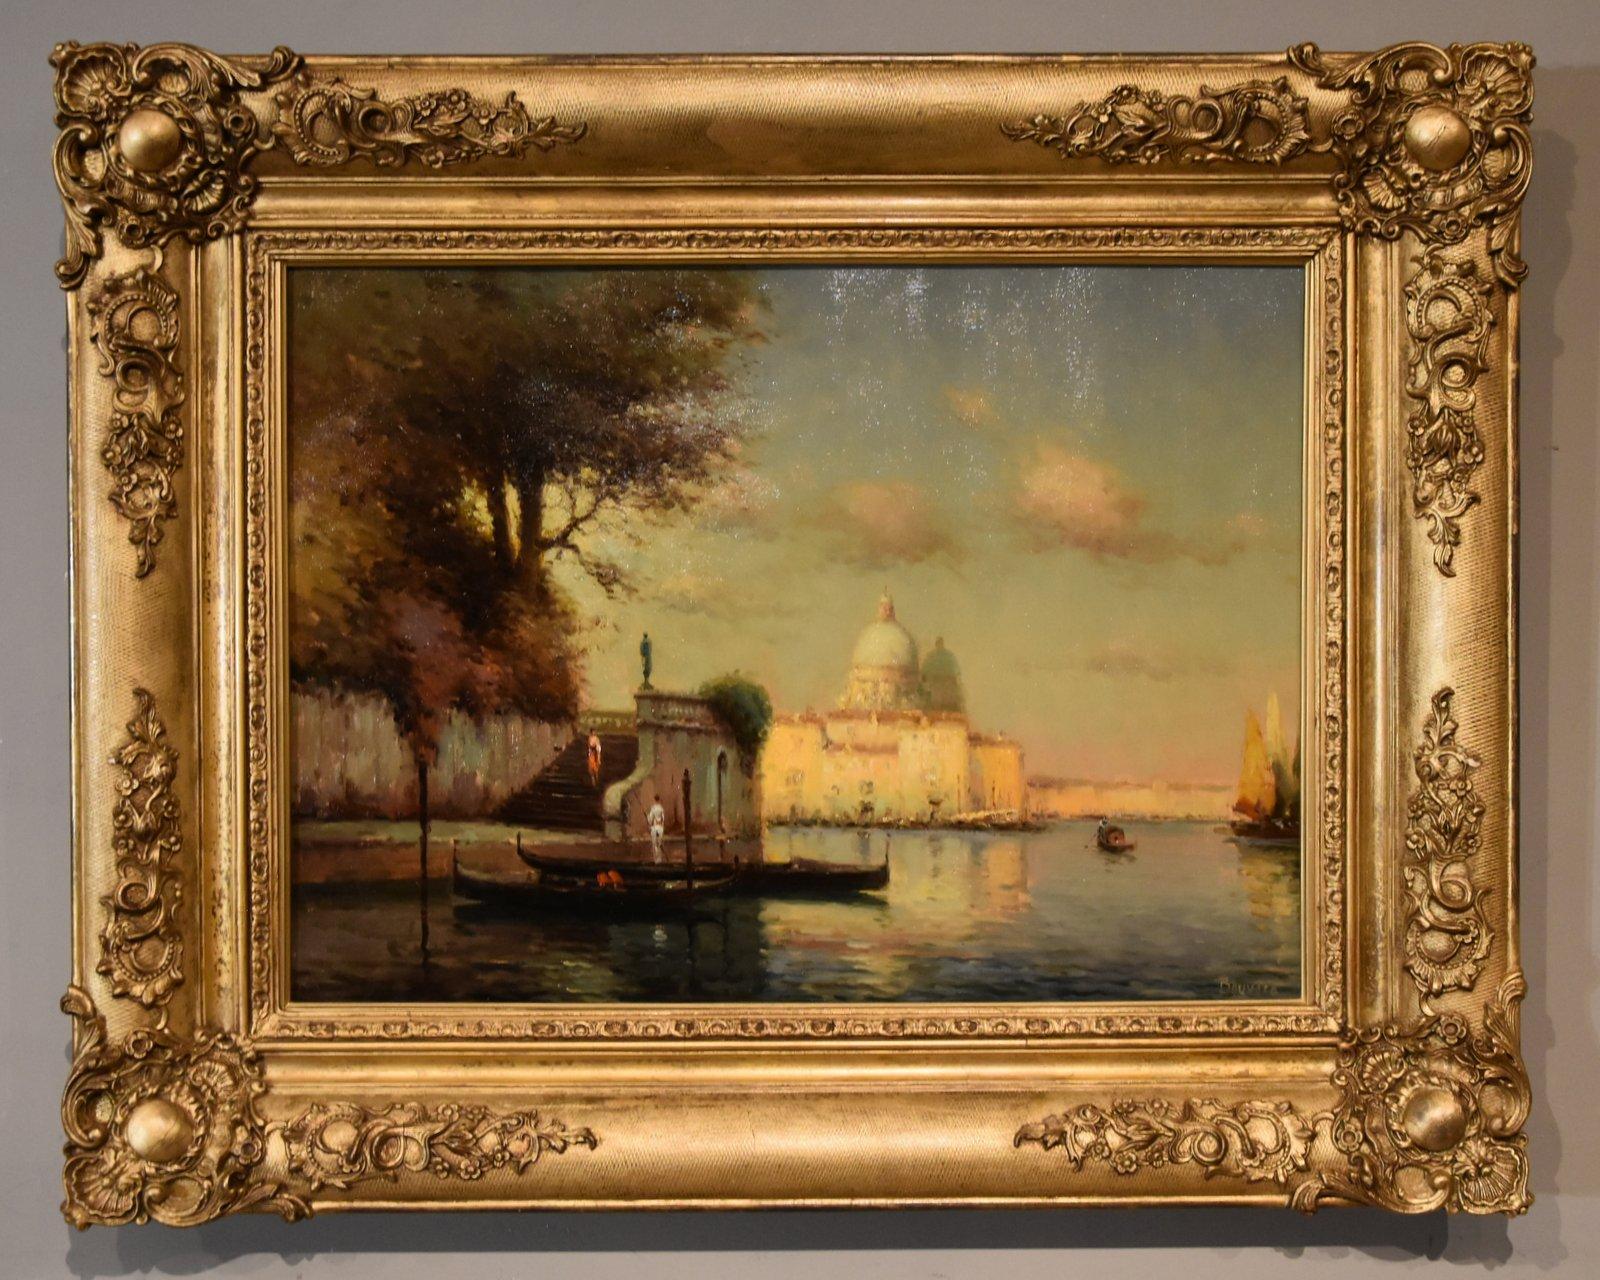 Oil Painting by George Noel Bouvard "Venice, Evening" 1912- 1975  popular French painter of atmospheric Venetian scenes. Son of Antoine Bouvard and father to Colette Bouvard who are both artists. Oil on canvas. Signed.

Dimensions unframed 19.5 x